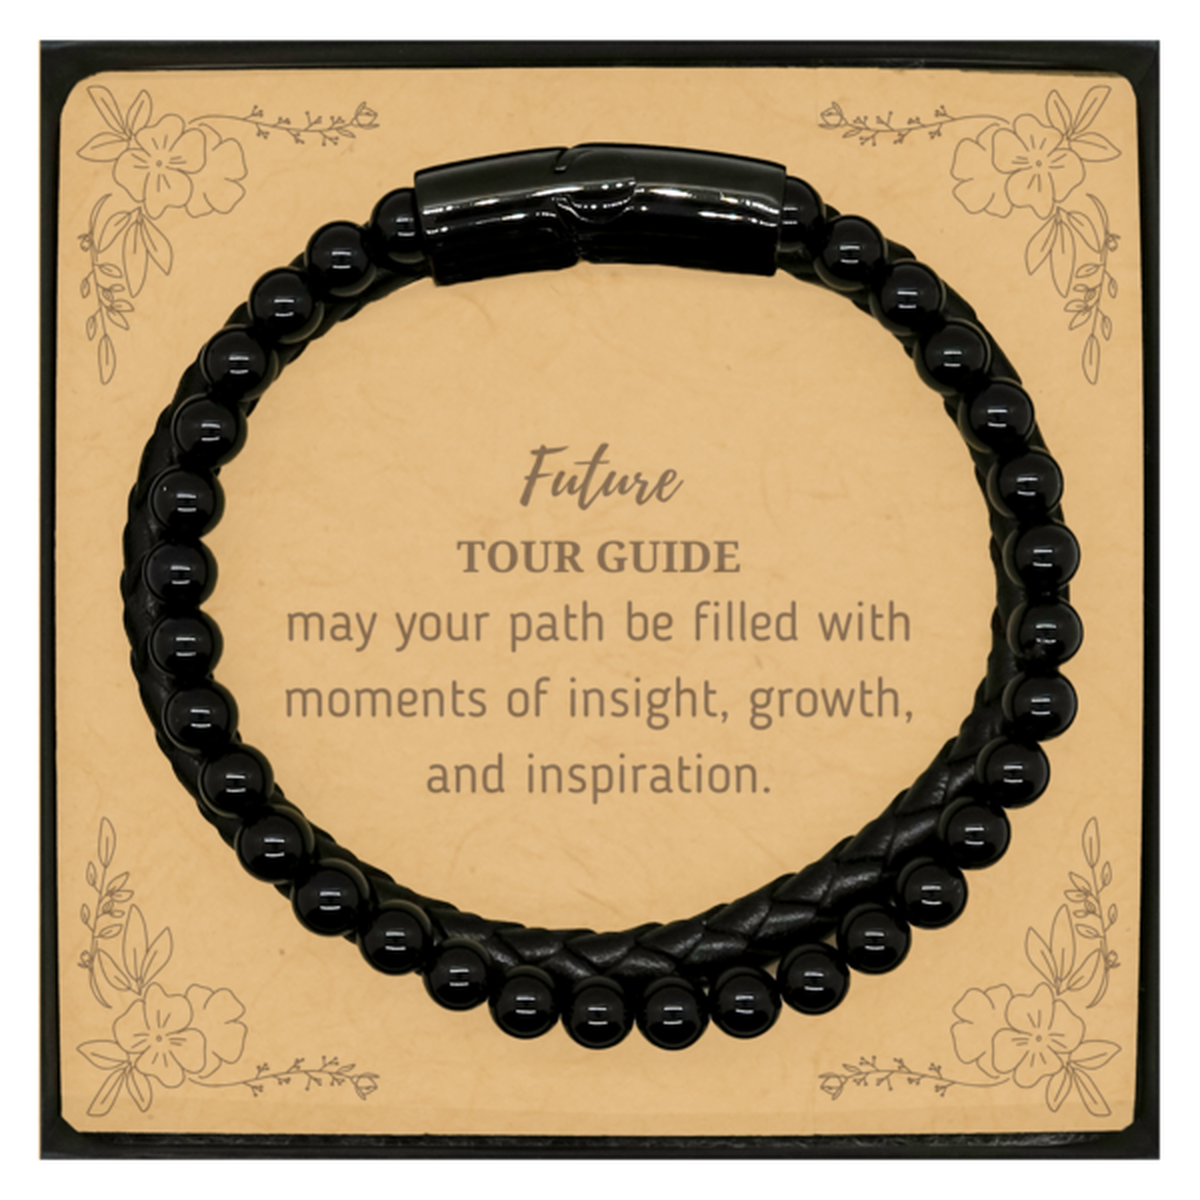 Future Tour Guide Gifts, May your path be filled with moments of insight, Graduation Gifts for New Tour Guide, Christmas Unique Stone Leather Bracelets For Men, Women, Friends